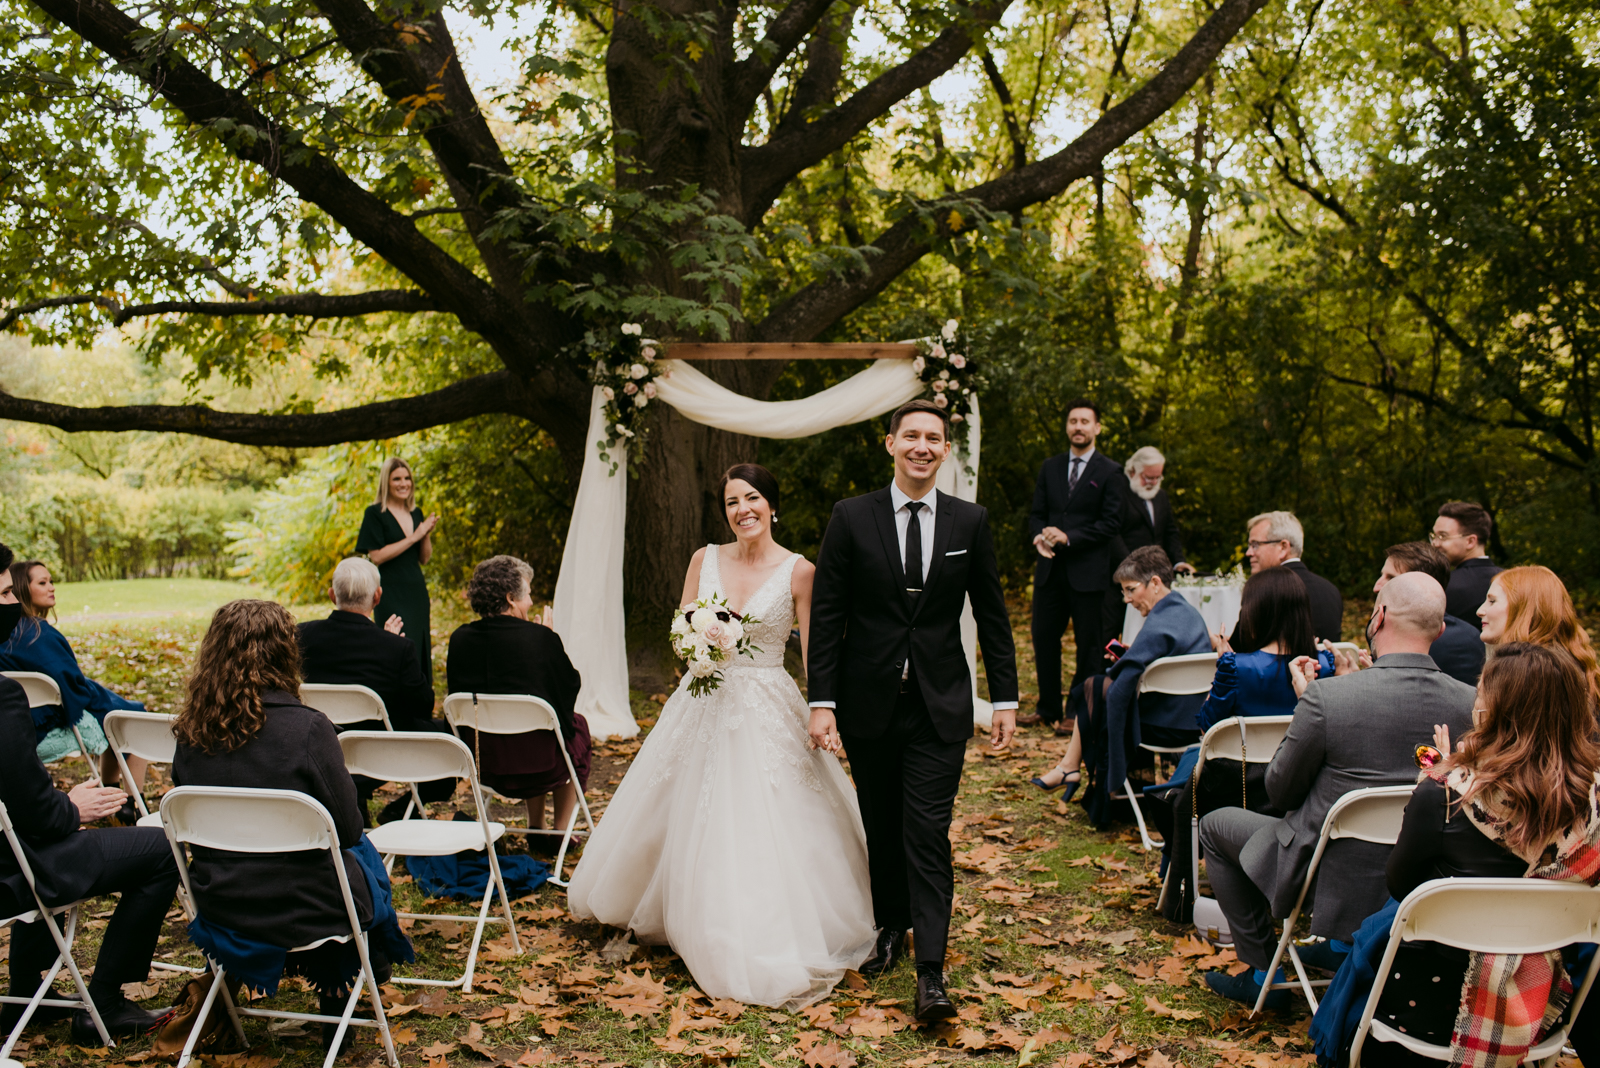 bride and groom recessional after outdoor wedding ceremony at billings estate